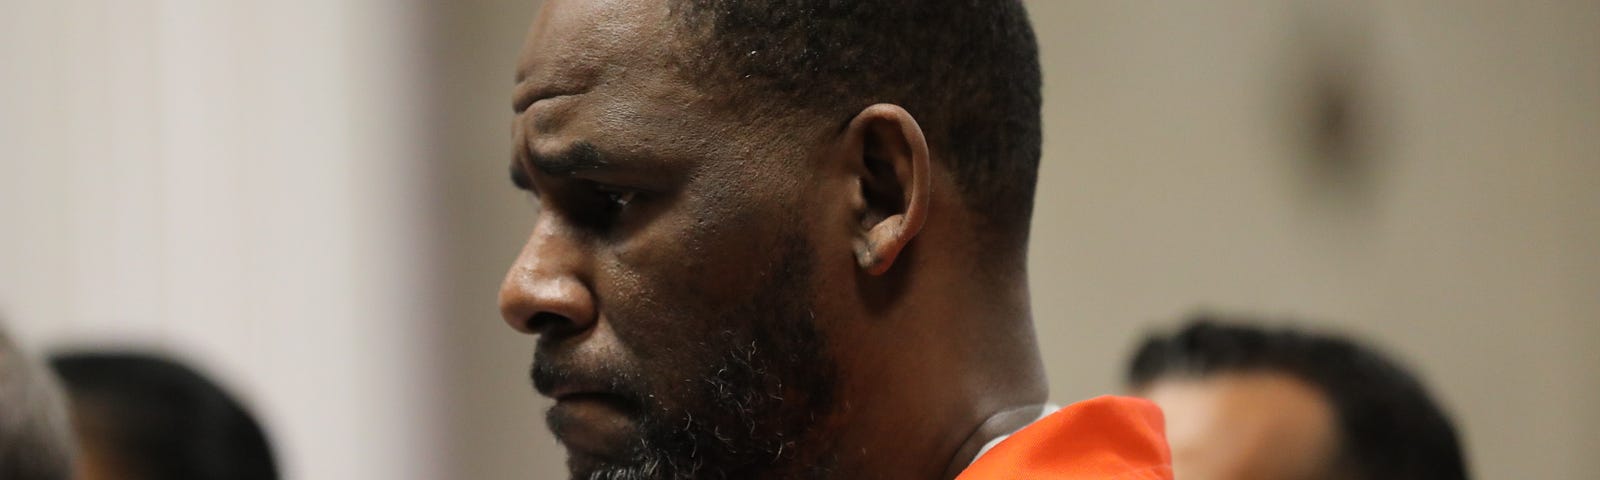 R. Kelly standing at a status hearing, wearing an orange prison jumpsuit